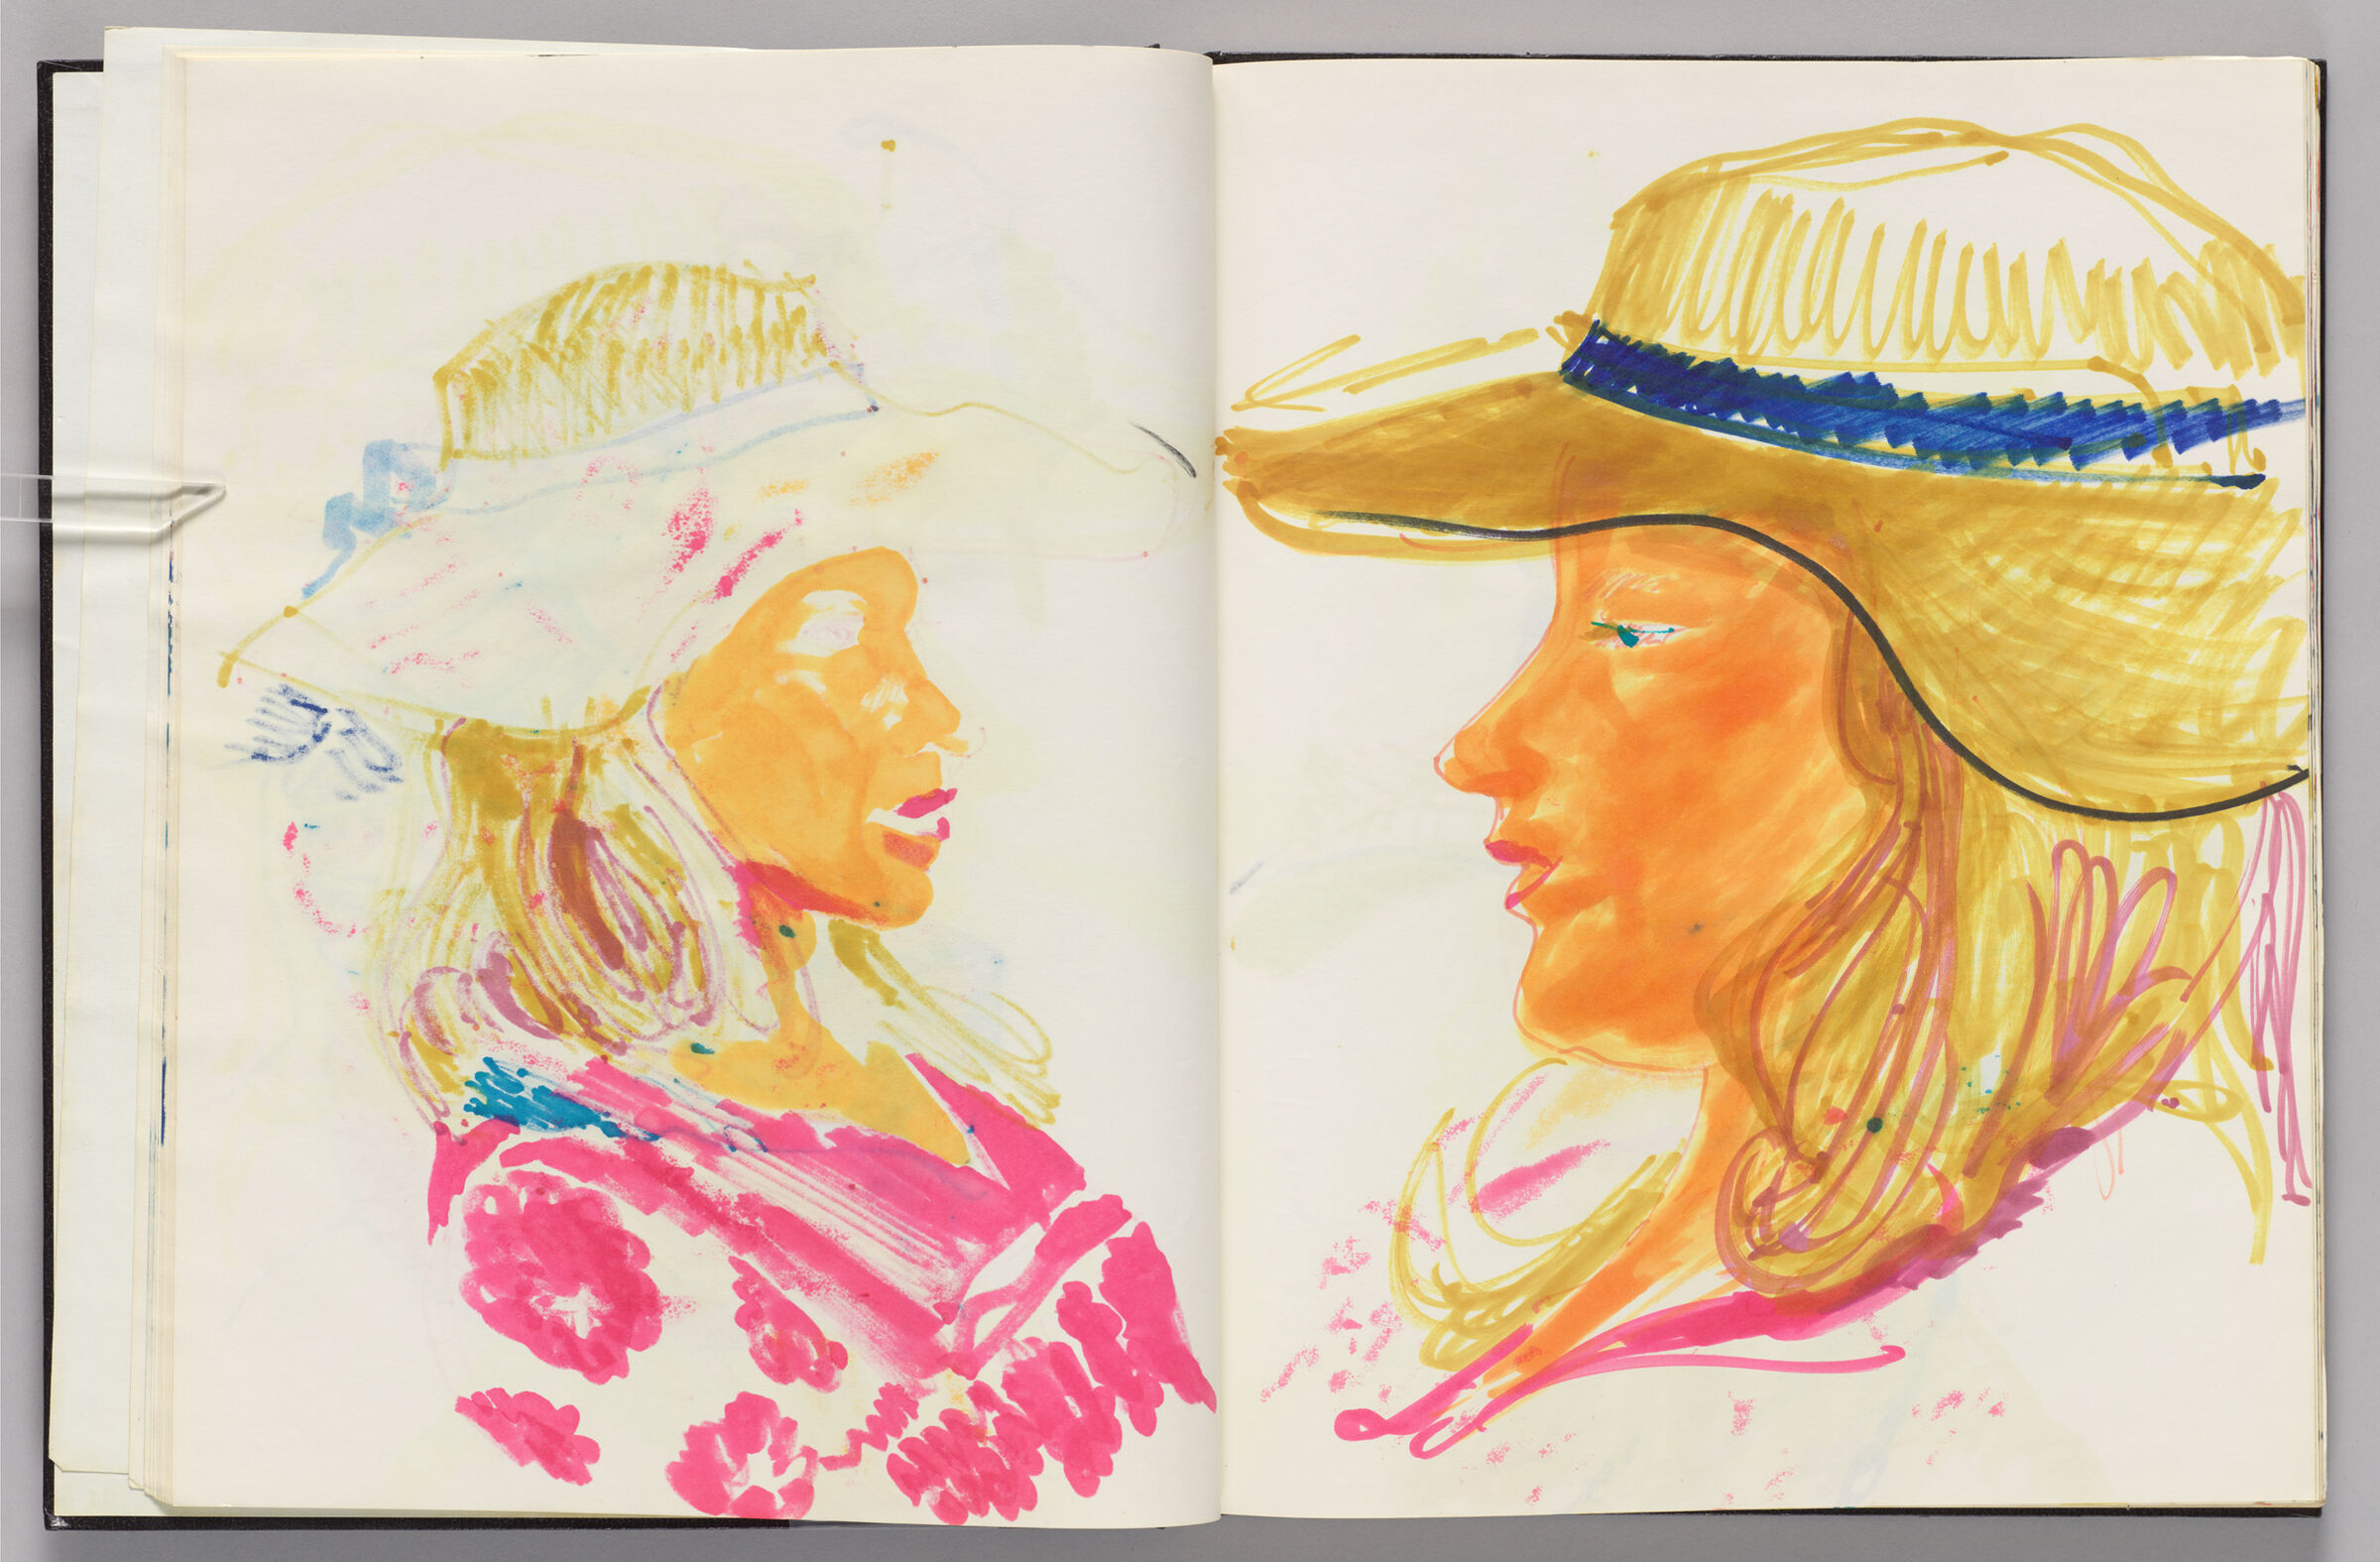 Untitled (Bleed-Through Of Previous Page, Left Page); Untitled (Profile Portait Of Female Figure (Elizabeth Goldring), Right Page)